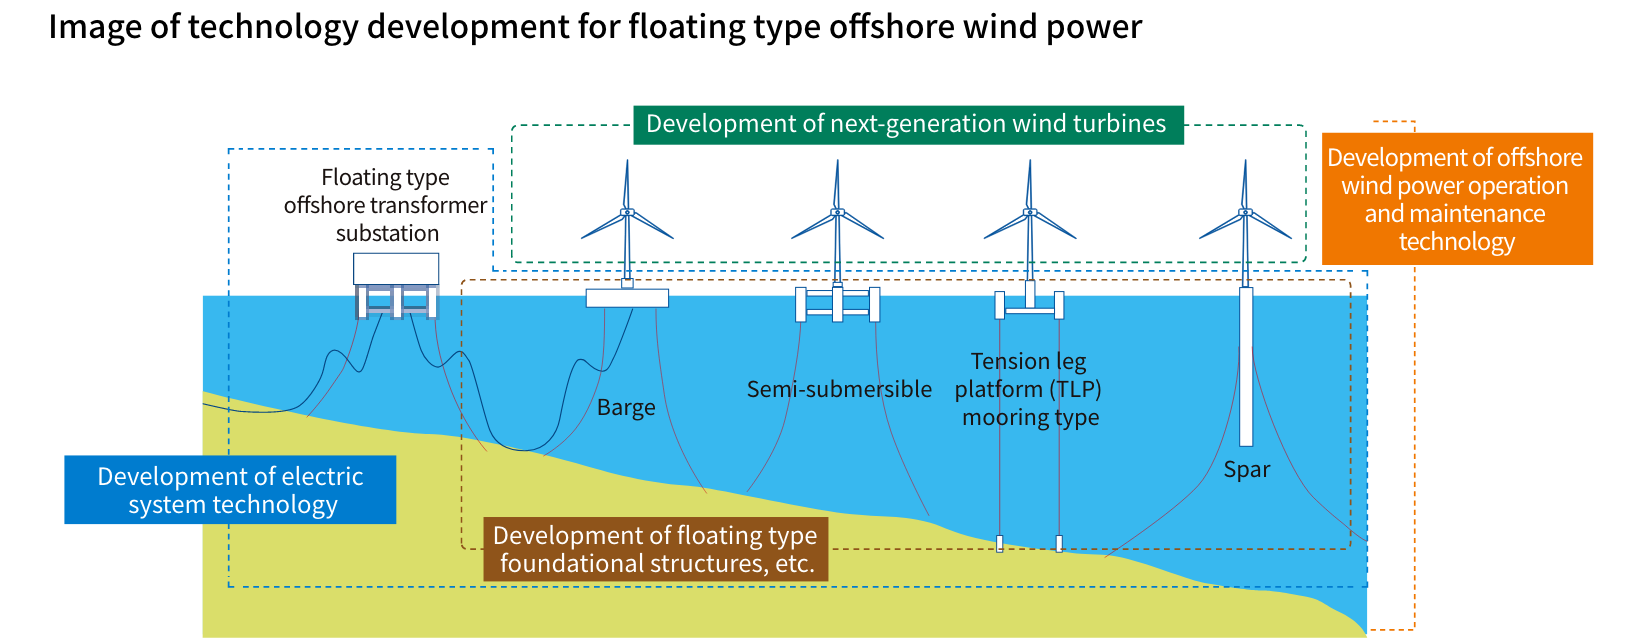 Cost Reductions for Offshore Wind Power Generation